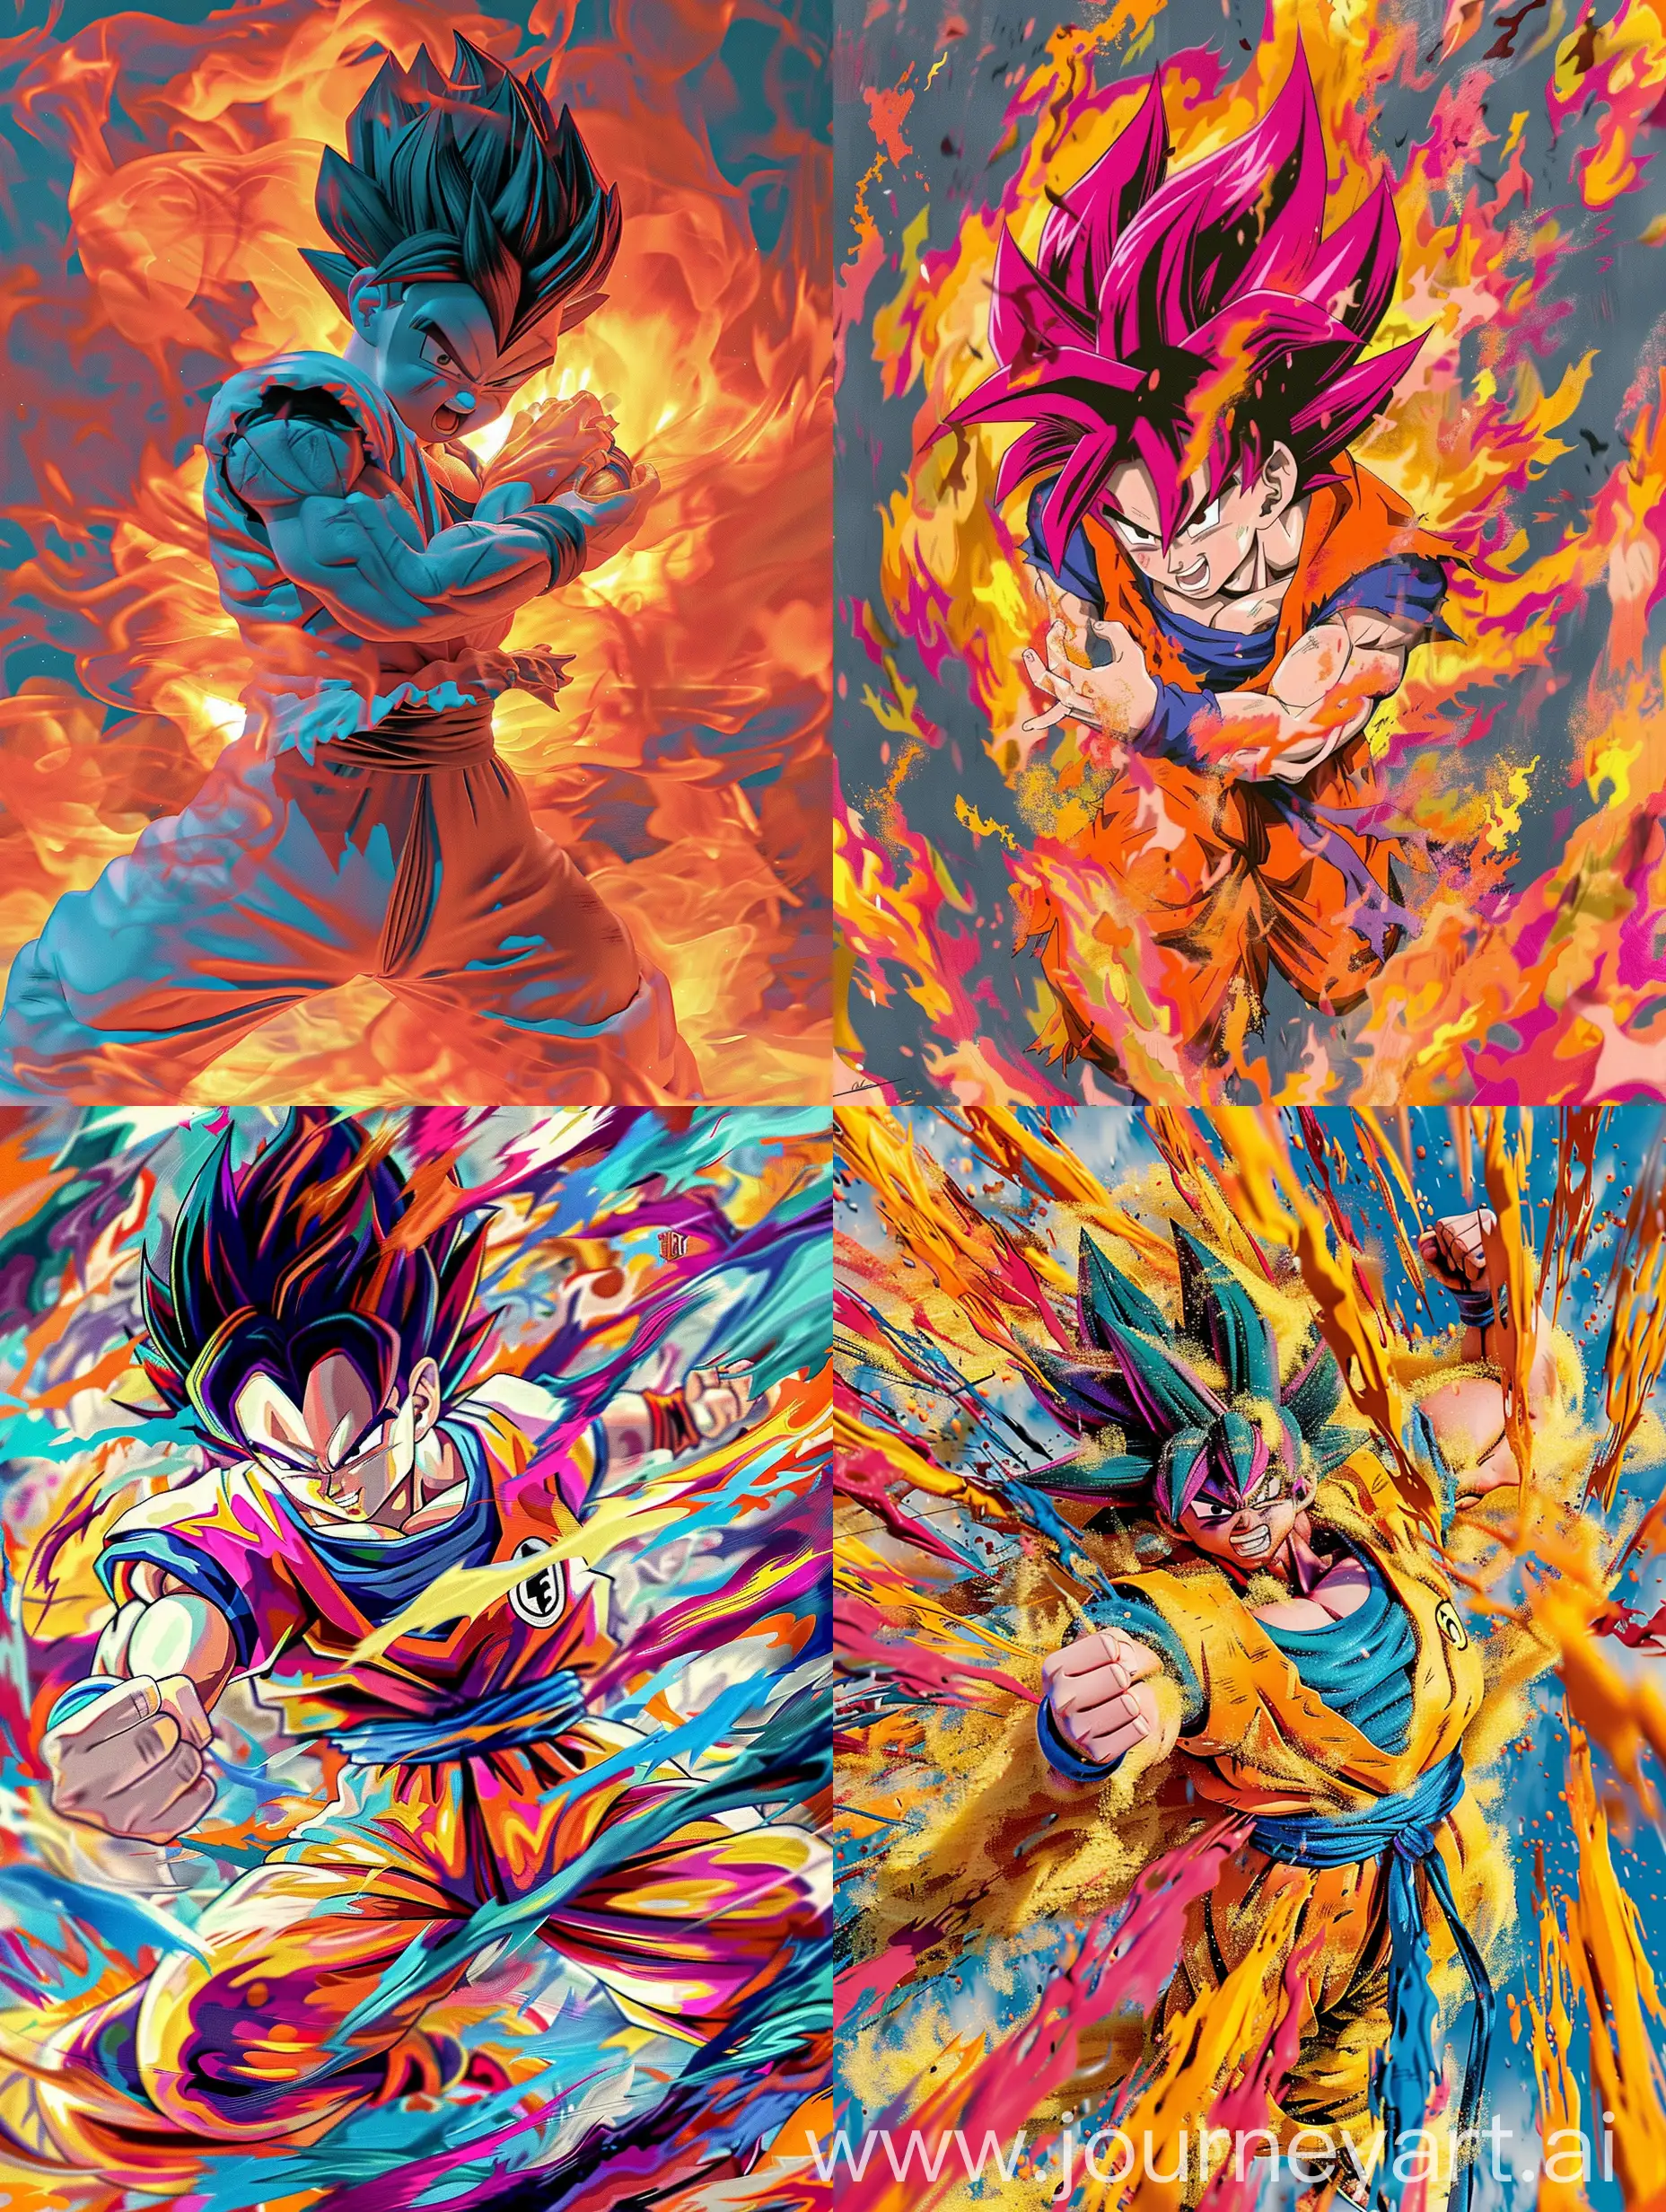 ral Photo of Dragonball  goten transforms into Super Saiyan in incendiary display of fire enveloping bending to his will, vibrant colored flames flow together in a complementary way. spectacular spontaneous perfection texture, organic, professional photography, Hasselblad camera, hyper - realistic, Intricate fine details, UHD, HDRI, hyperrealism 32k
--ar 4:5 --s 1000 --c 100 --w 1000 --style raw